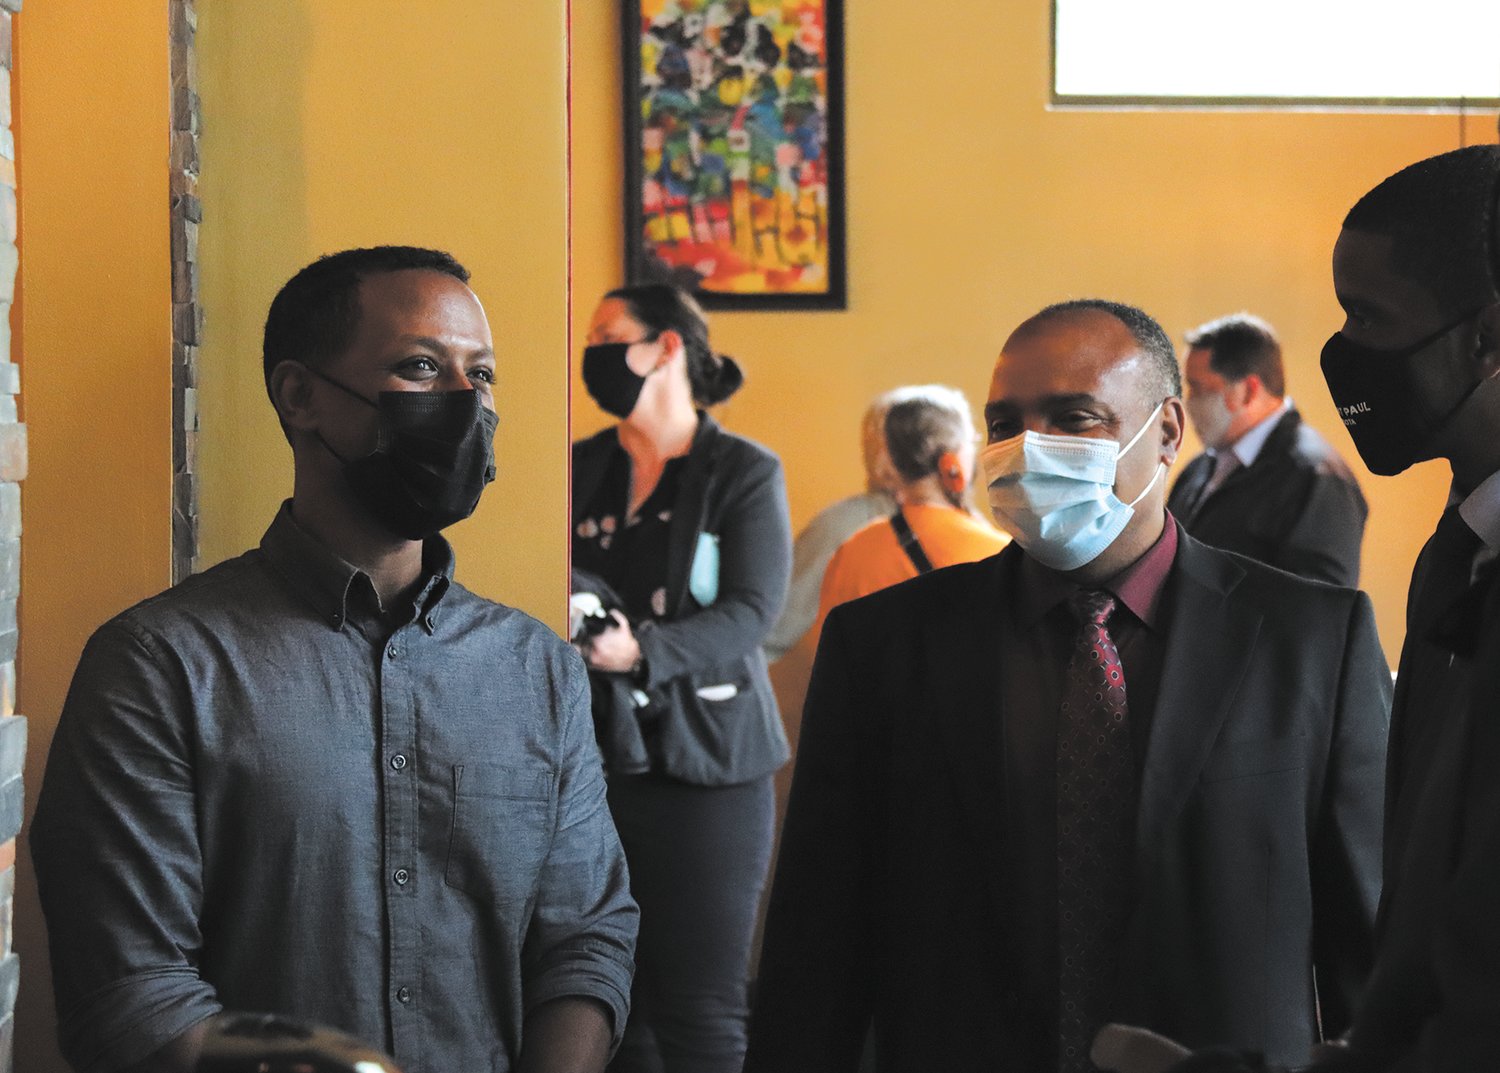 olomon Hailie (left), who owns Bole Ethiopian with his wife, Rekik Abaineh, chats with African Economic Development Solutions Executive Director Gene Gelgule (center) and St. Paul Mayor Melvin Carter during the ribbon cutting event on May 27, 2021, one year after the restaurant burned to the ground in the civil unrest along University Ave. after George Floyd’s murder.

“When we needed something, we knew who to call,” stated Hailie. “We appreciate your support and love.” They received a $50,000 grant through the We Love St. Paul/We Love Midway fund to help with the new space in the former Fox Trot Burger (1341 Pascal Street). “Thank you for leading the way,” said Midway Area Chamber of Commerce Executive Director Chad Kulas. (Photos by Tesha M. Christensen)